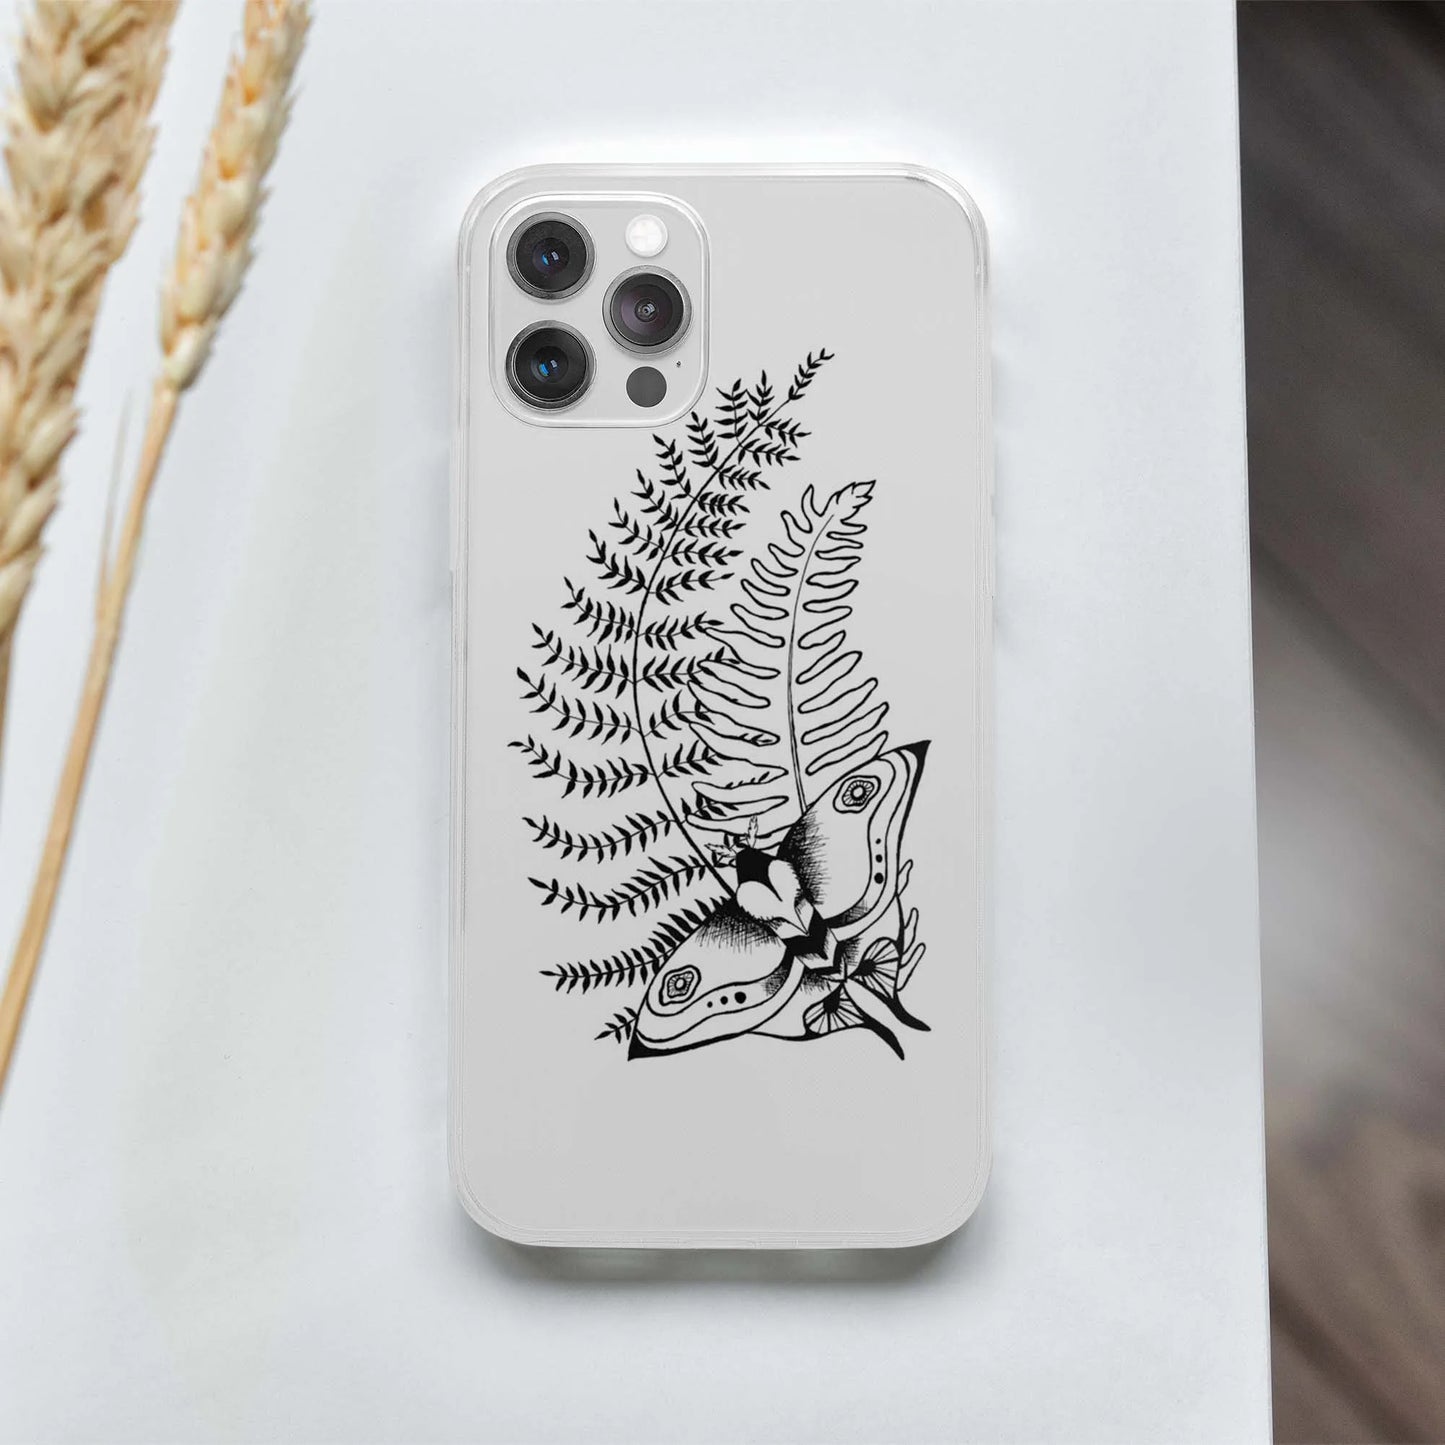 The Last Of Us Ellie Soft Phone Case for iPhone - Available at 2Fast2See.co